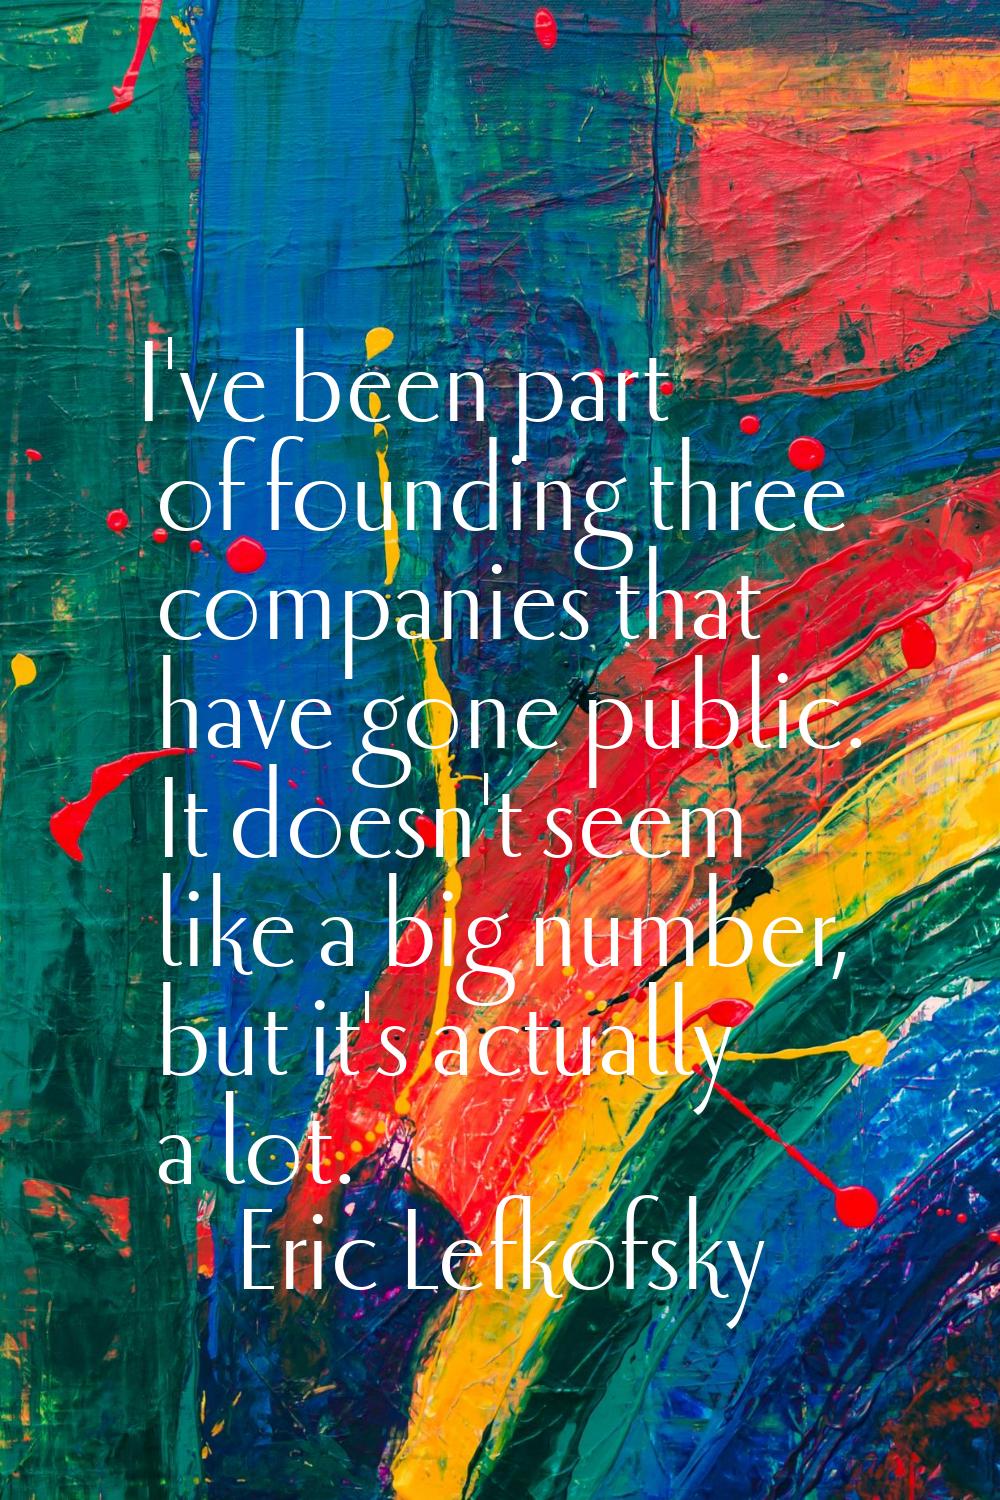 I've been part of founding three companies that have gone public. It doesn't seem like a big number